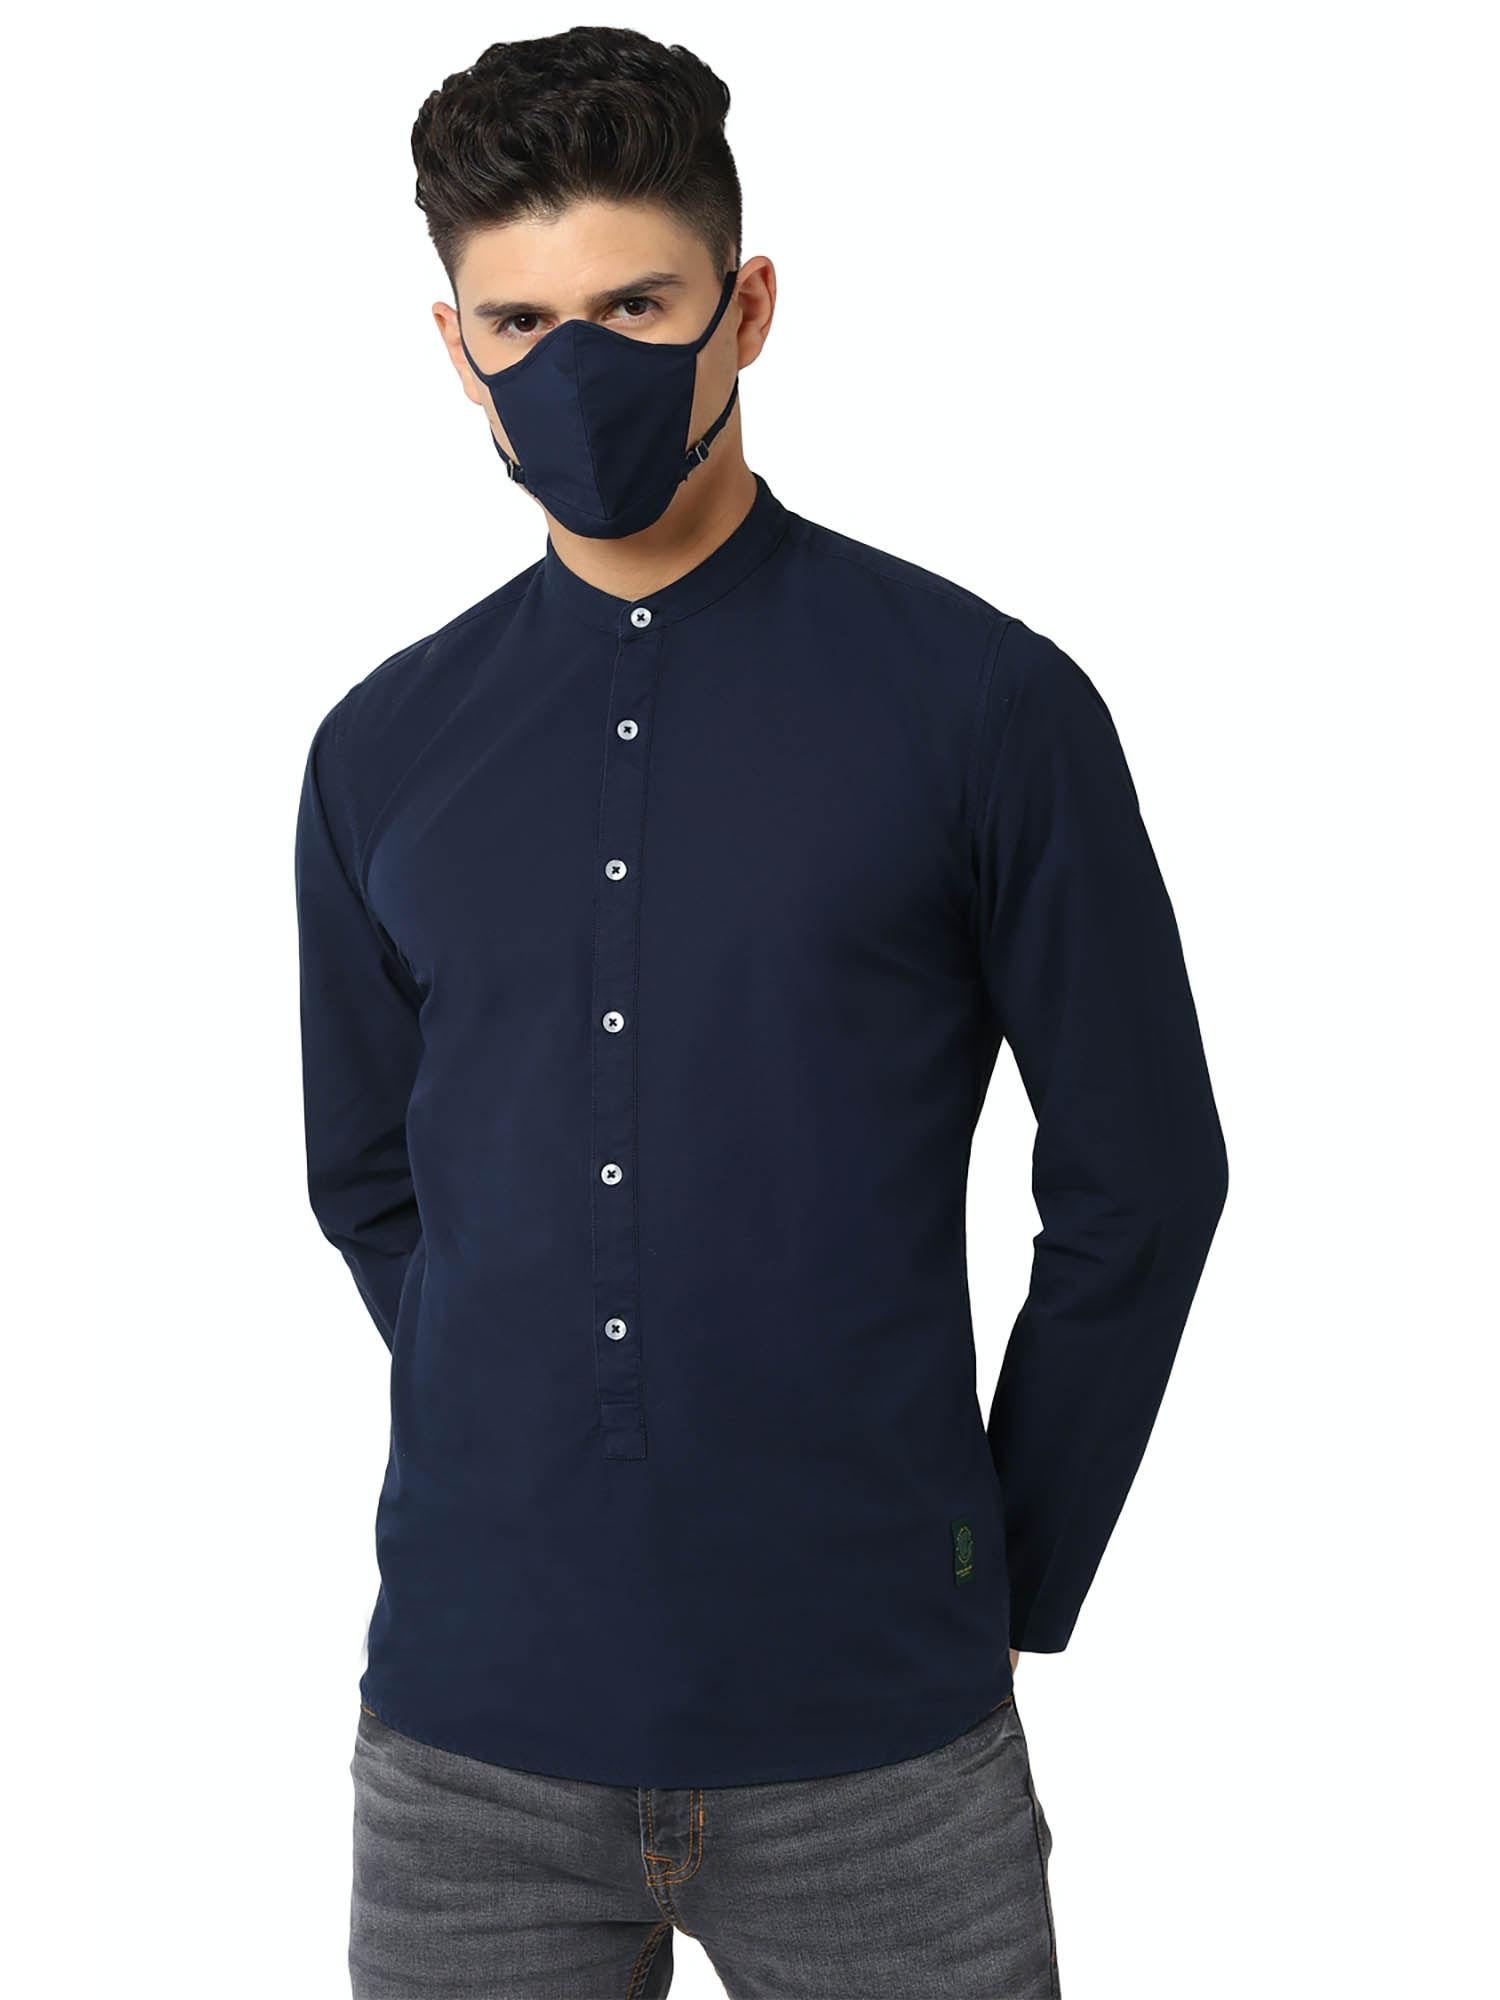 navy-blue-solid-casual-shirt-with-mask